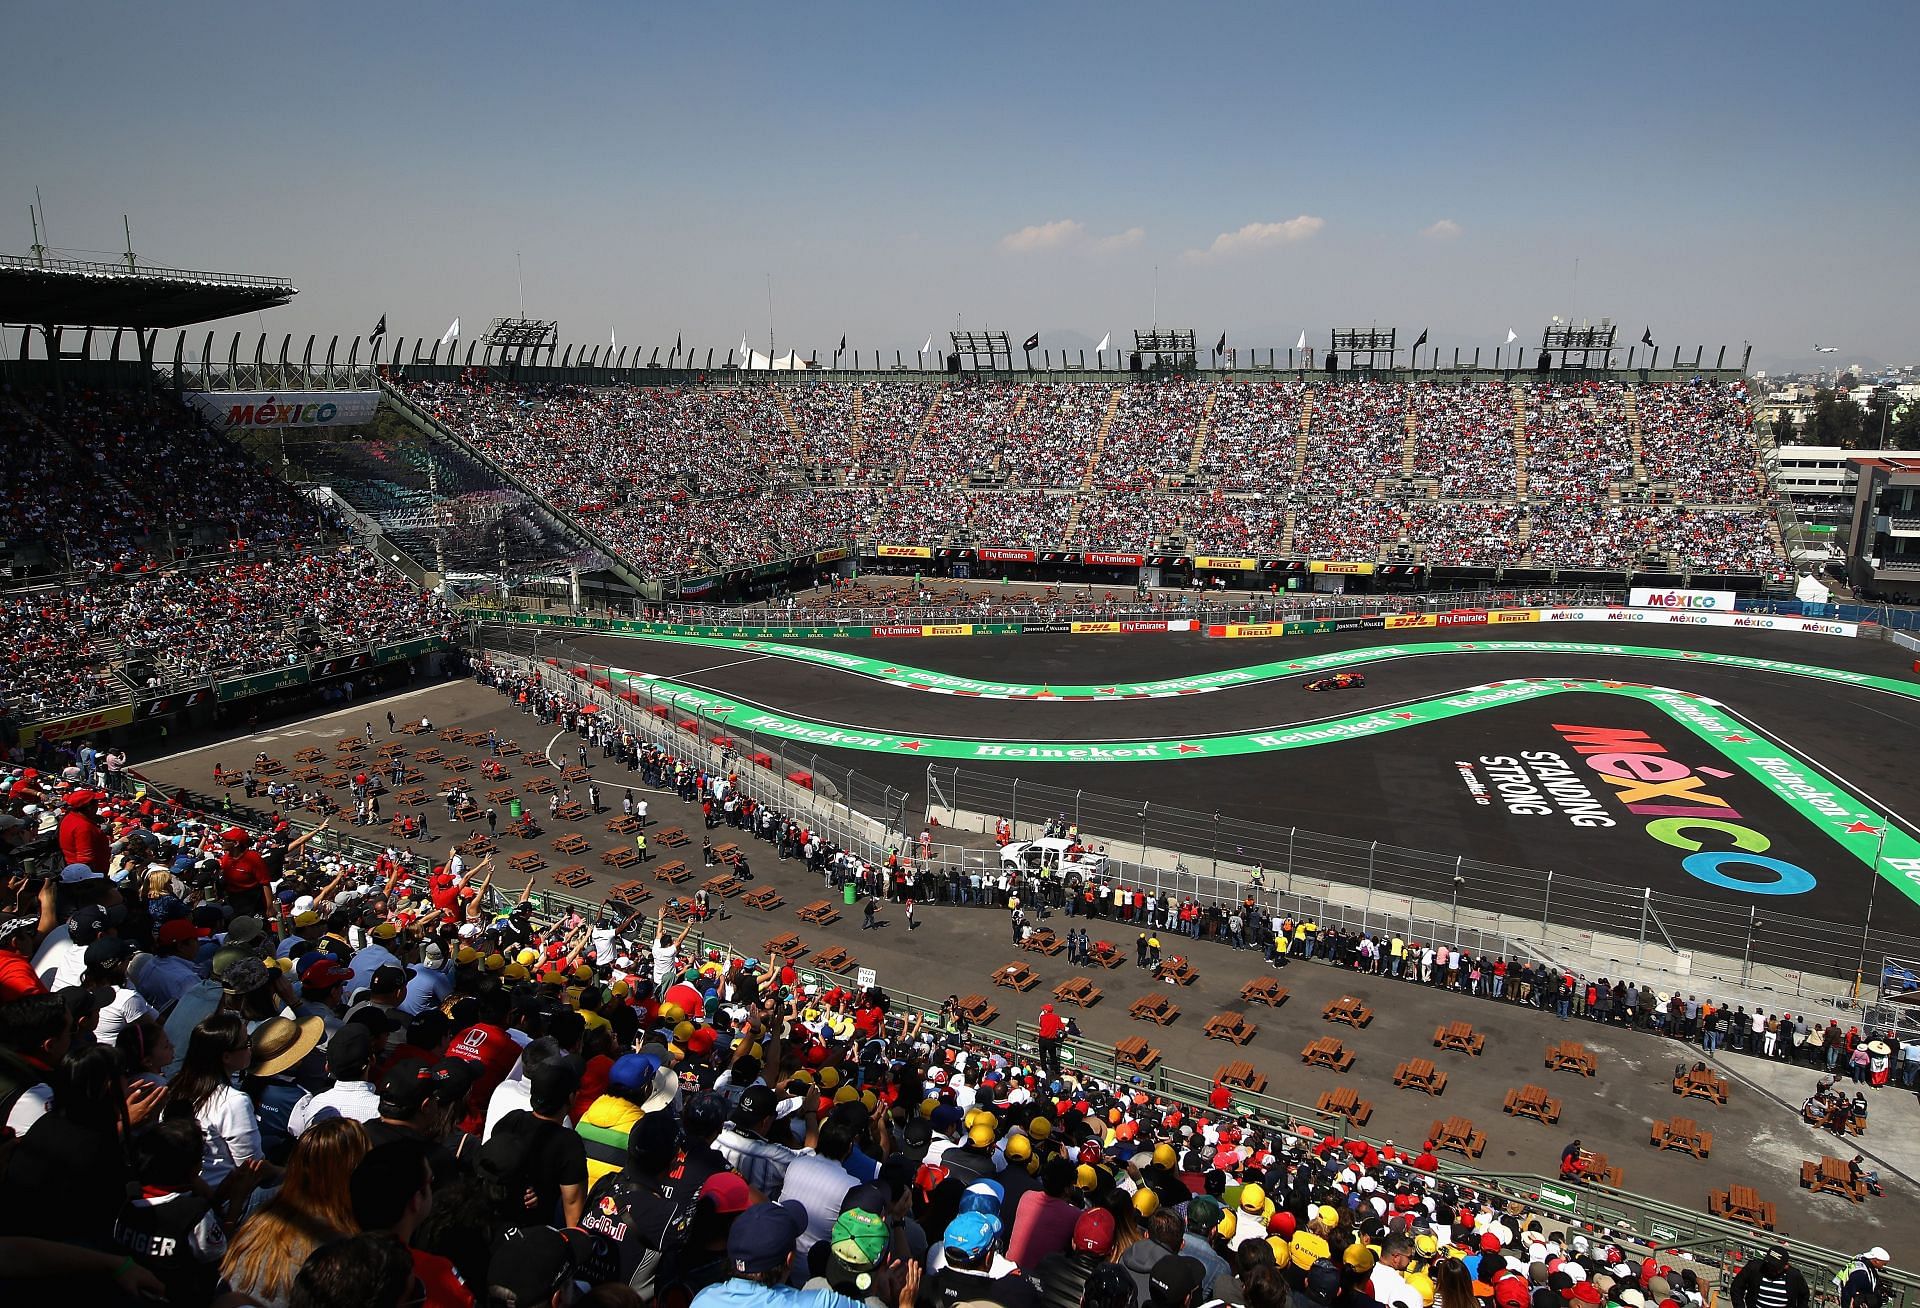 A general view showing Max Verstappen on track during 2019 Mexico GP . (Photo by Clive Mason/Getty Images)